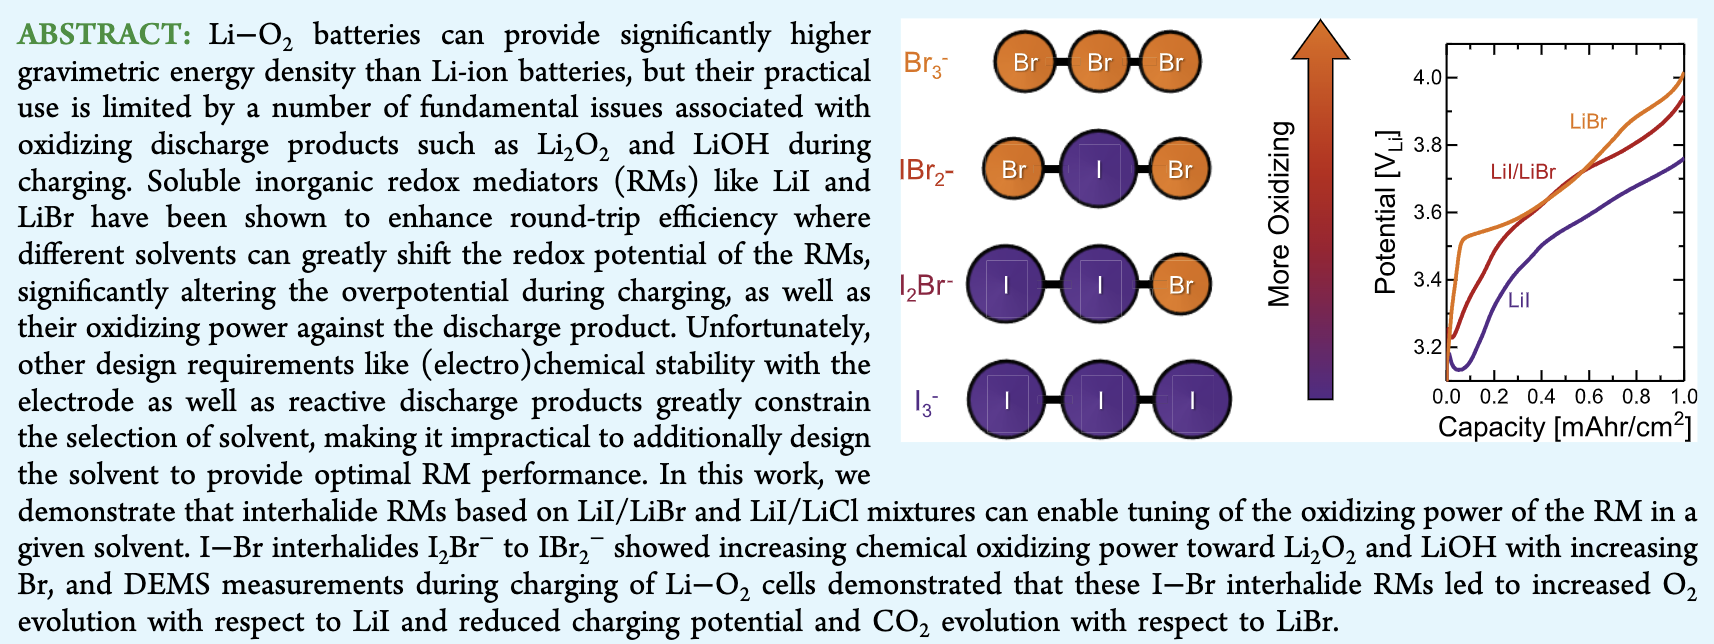 Preview of paper about Lithium-Oxygen Batteries.